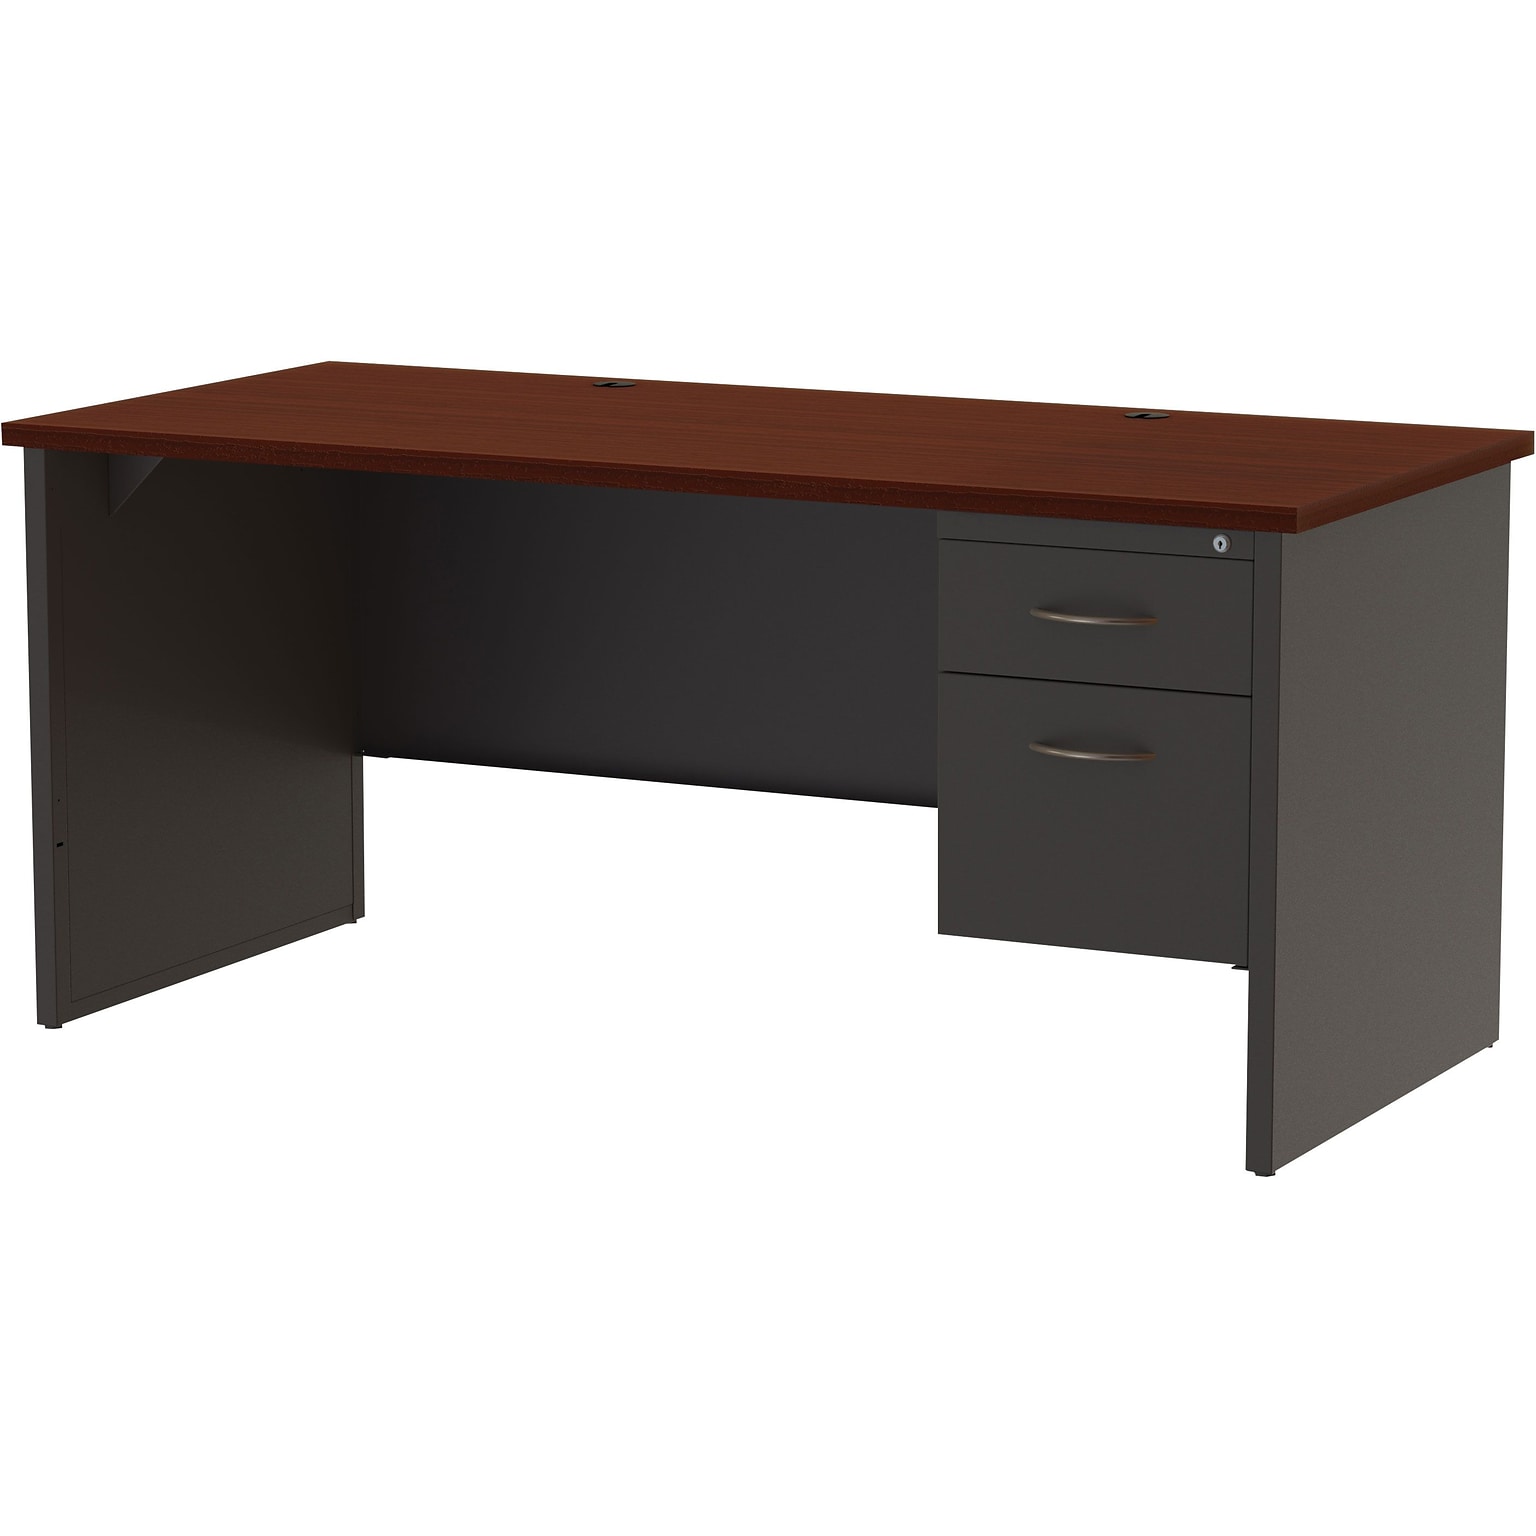 Quill Brand® Modular Right Single Pedestal Desk, Charcoal/Mahogany, 30Dx66W